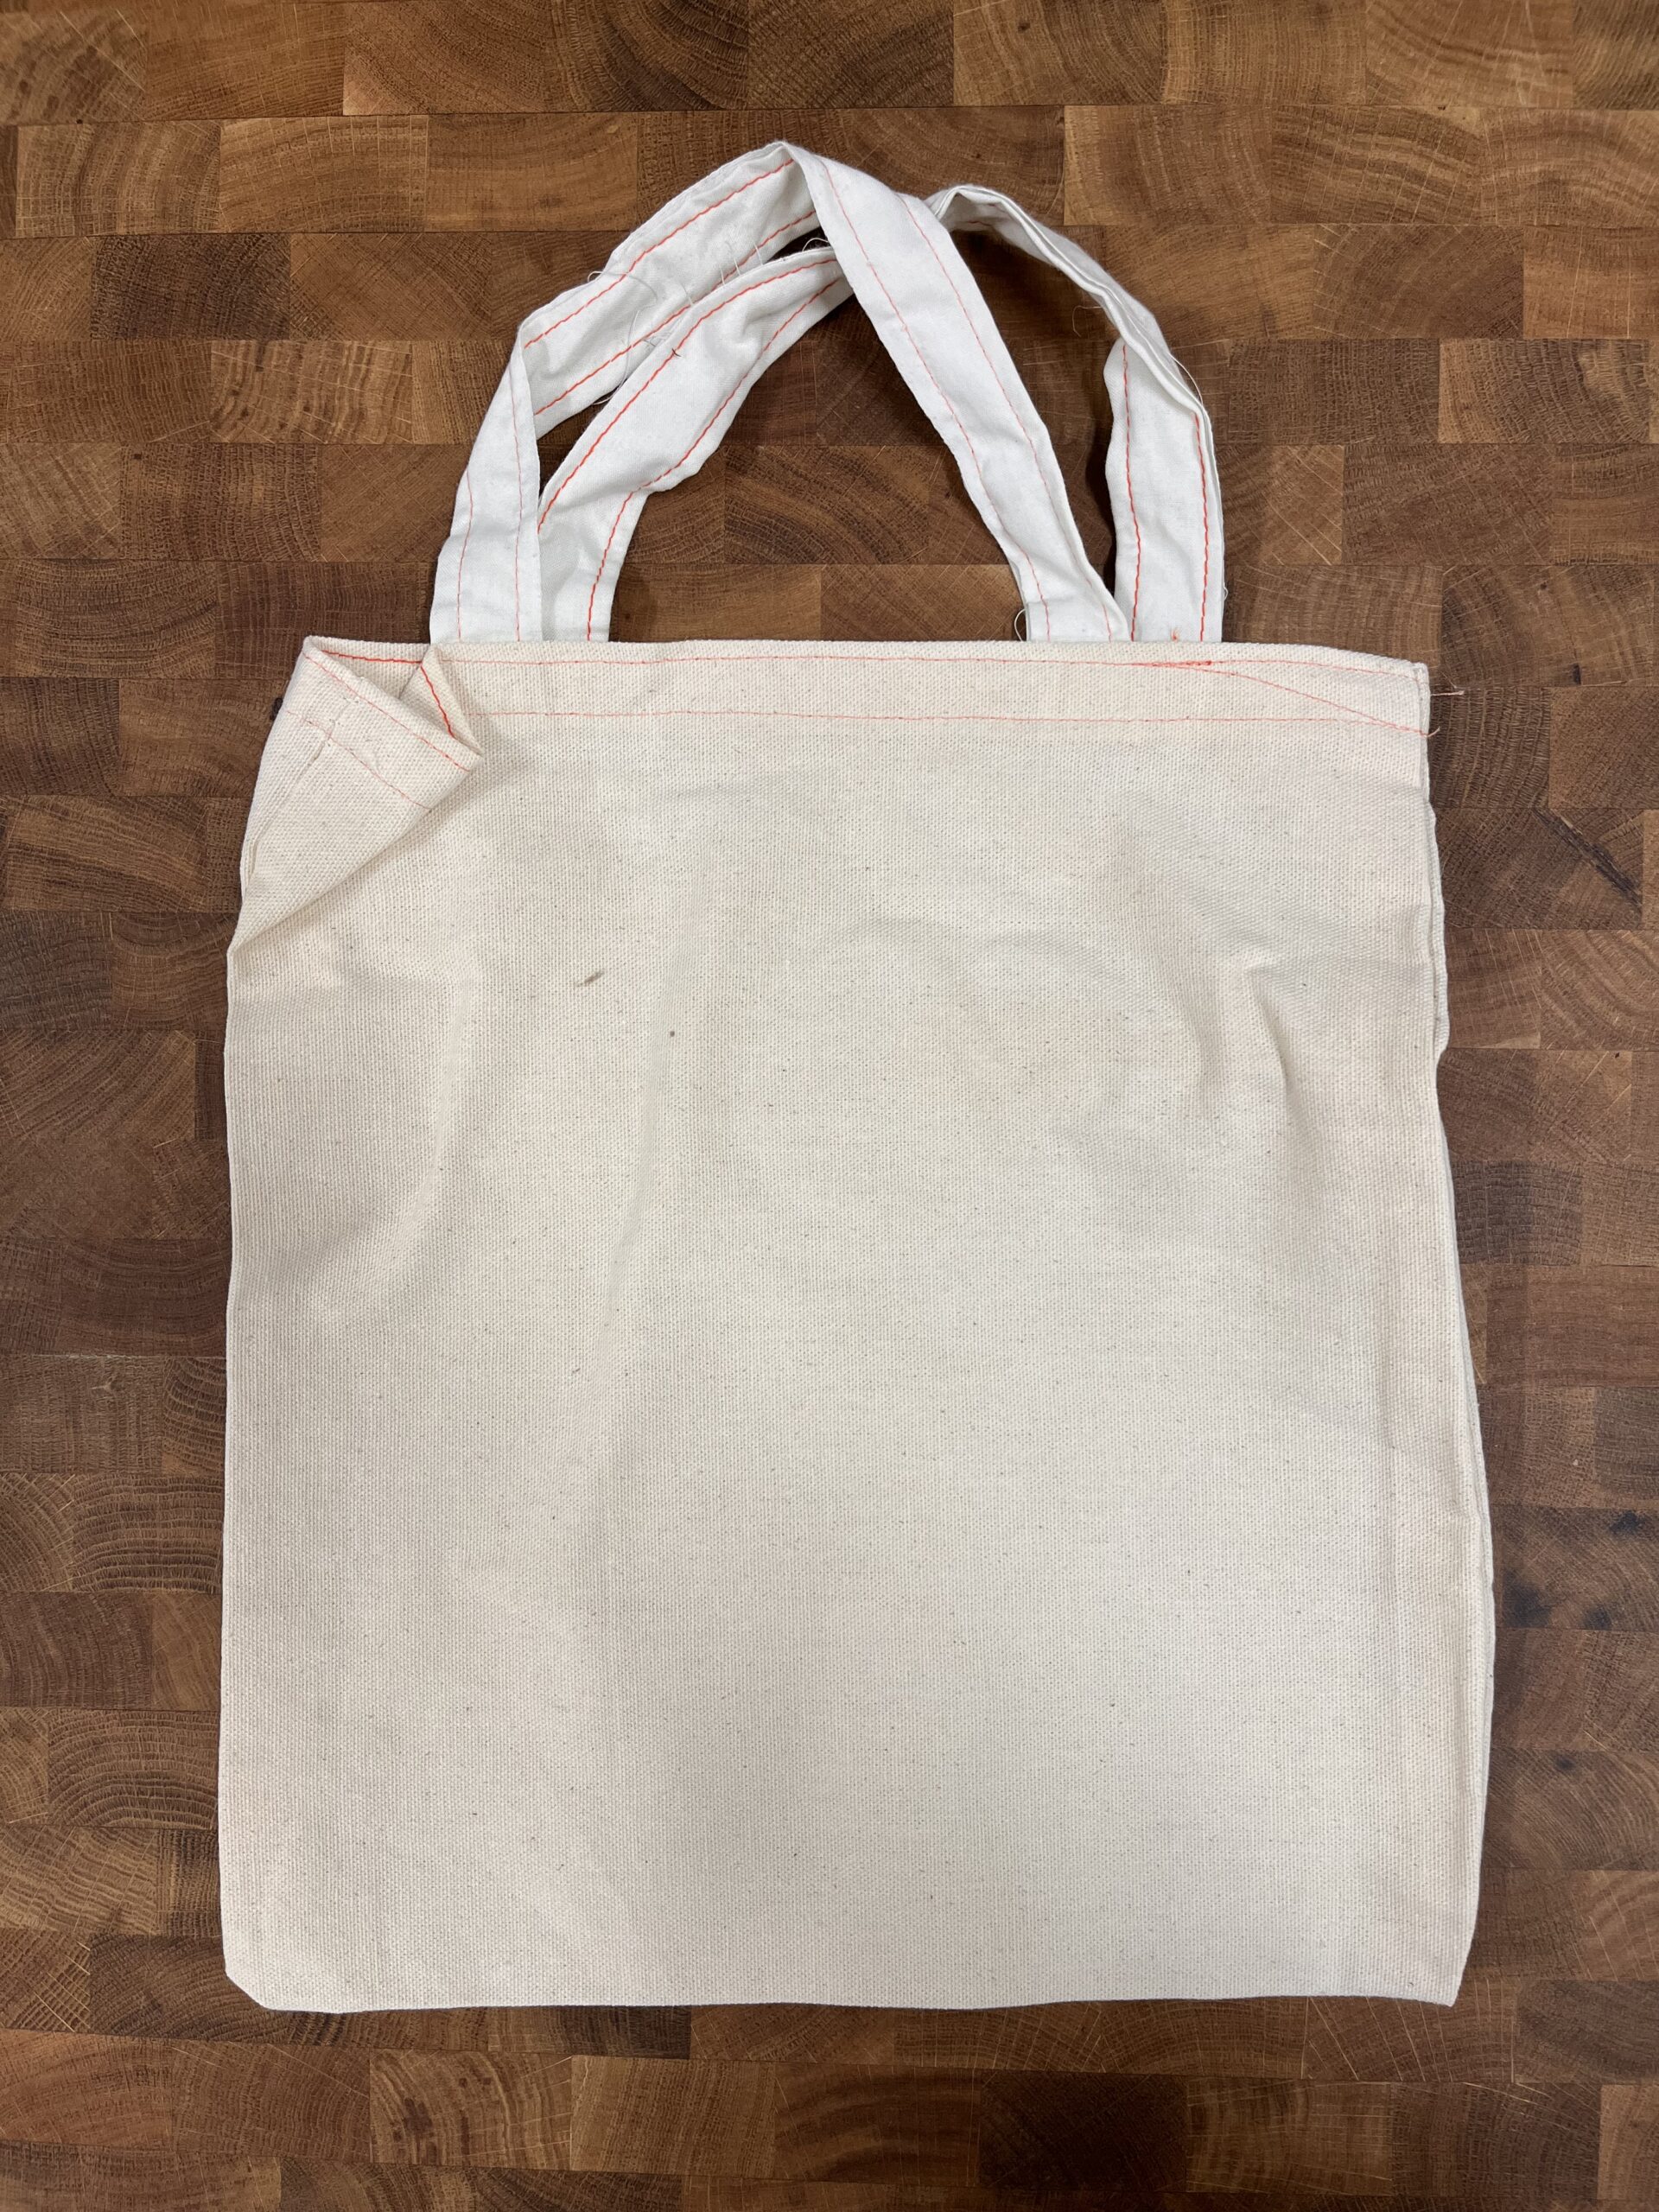 12x13" Cotton Bag with Handles